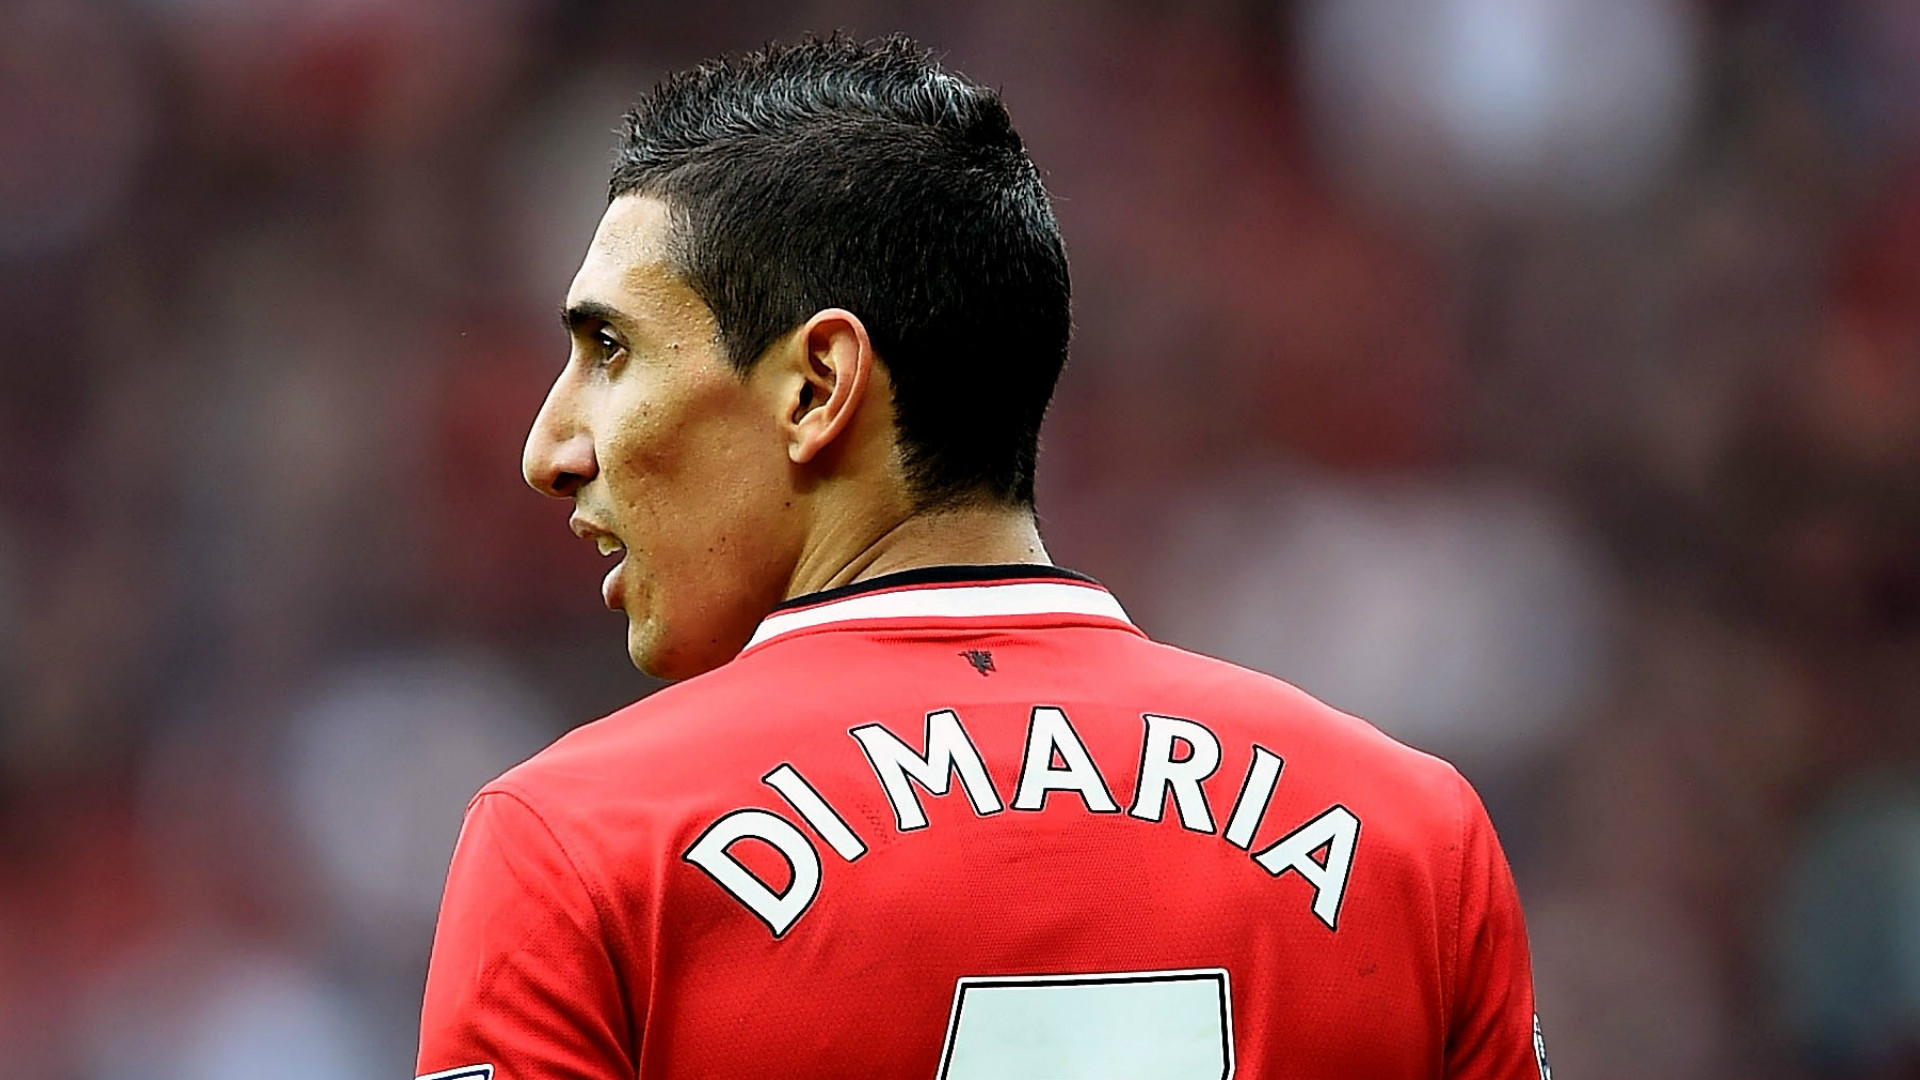 angel di maria manchester united 1ai4z3k2ftgy3176nj1np4676d Manchester United: Top 5 most expensive signings